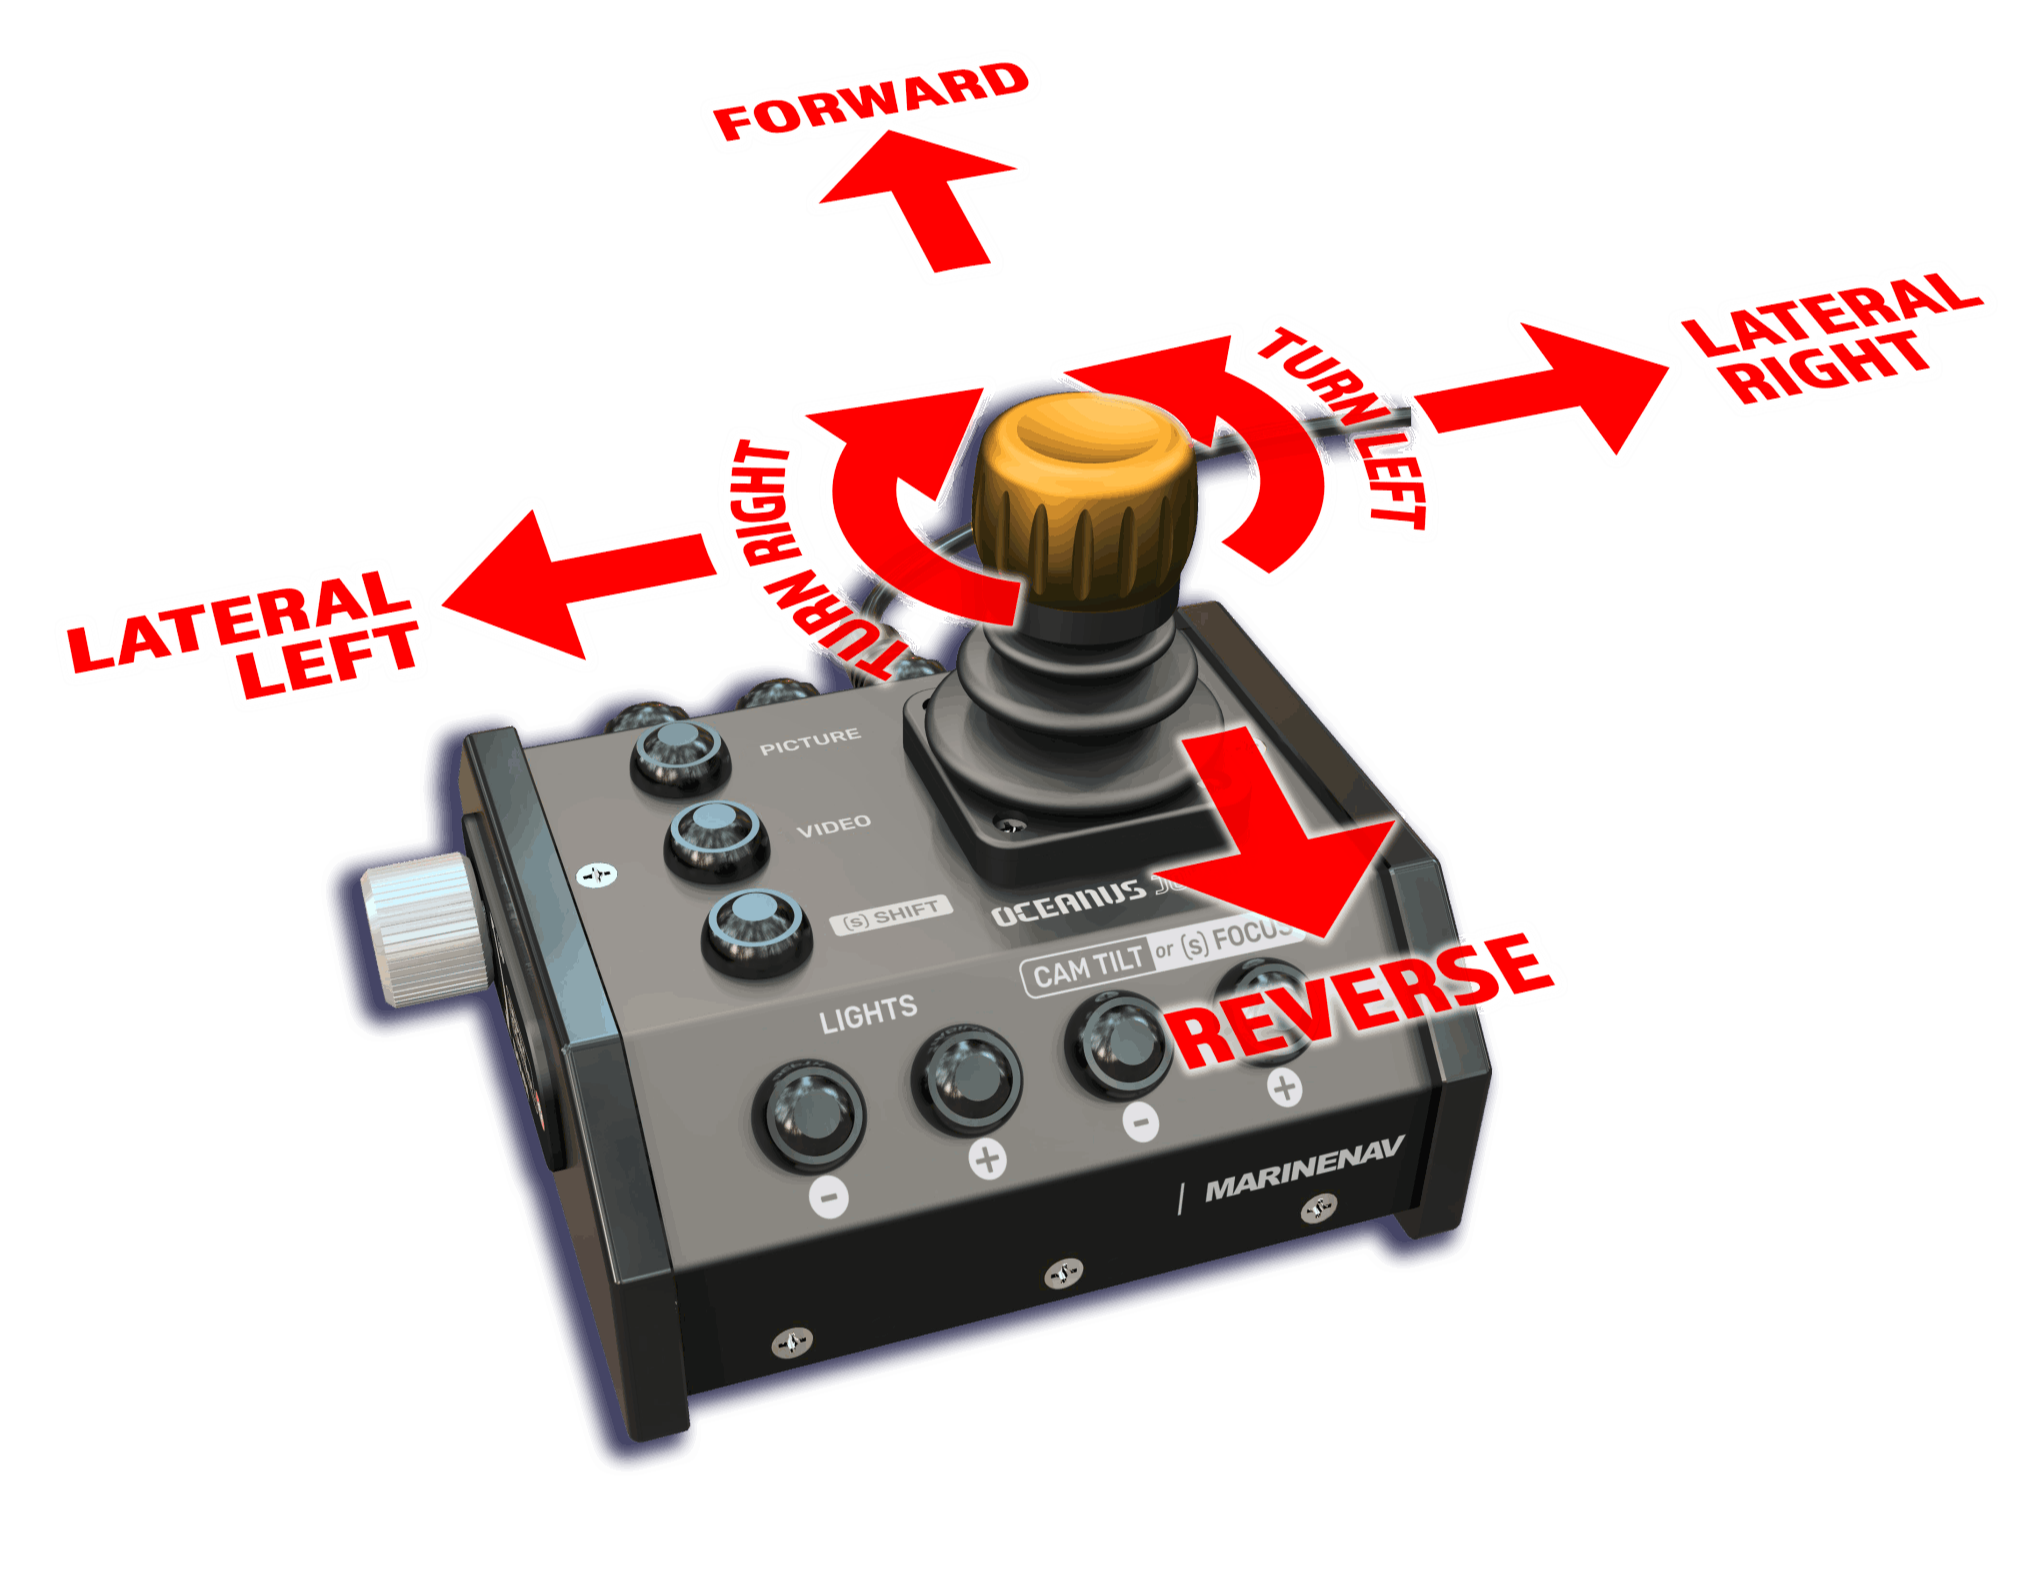 Oceanus Hand controller - configured for use with the Oceanus Hybrid ROV system